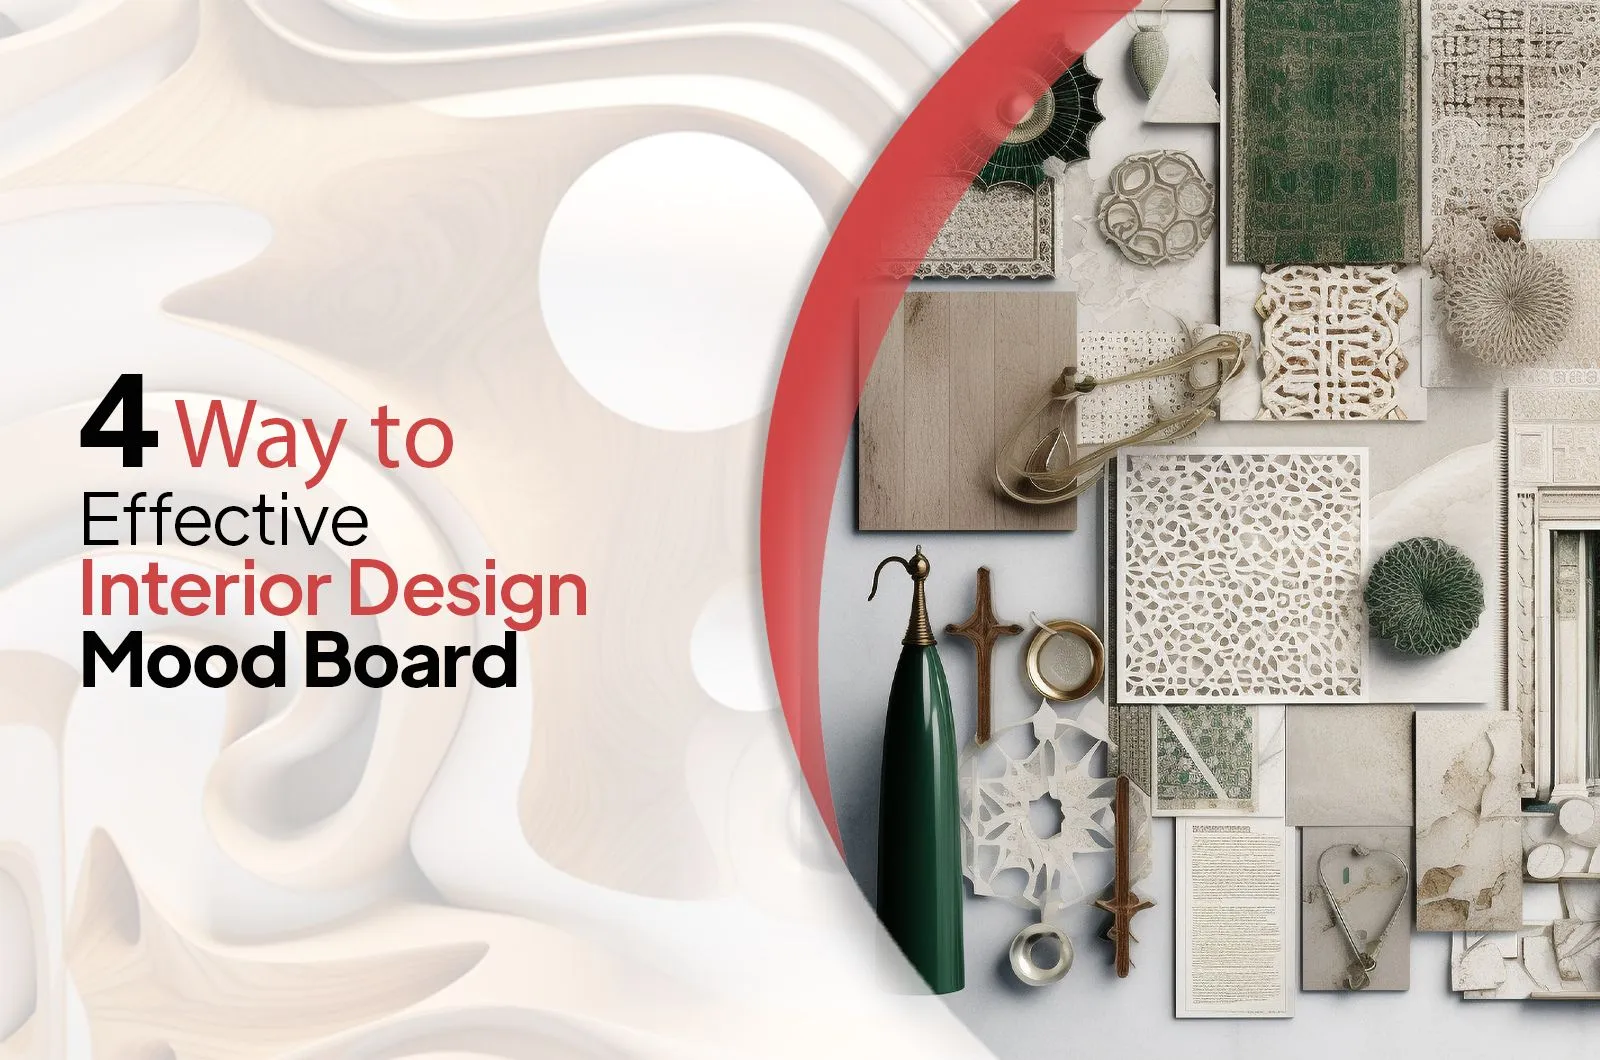 What Is Mood Board Interior Design and 4 Ways to Make It Effectively